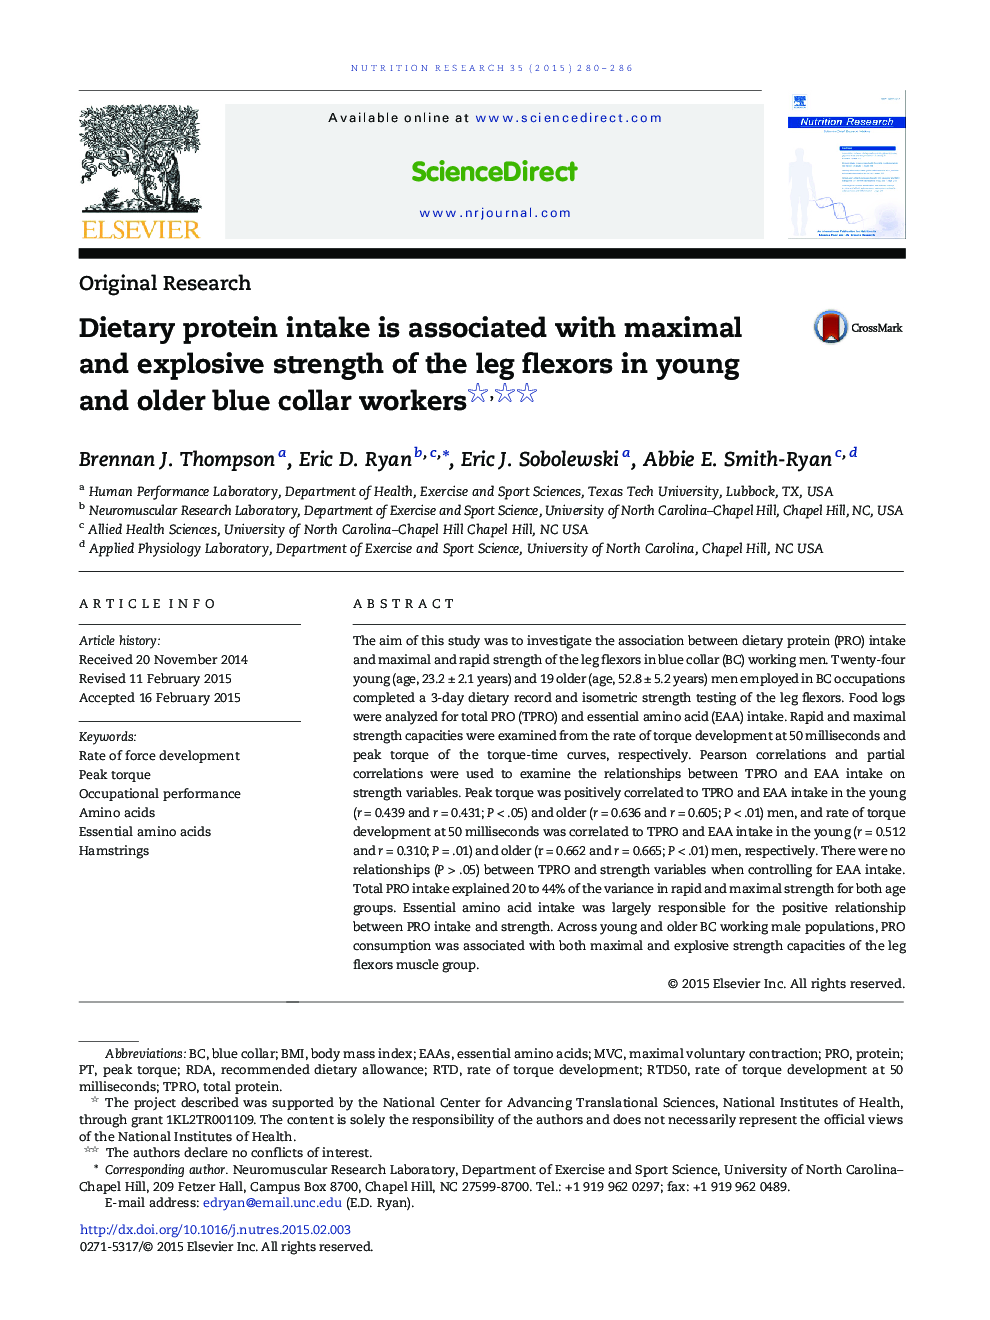 Dietary protein intake is associated with maximal and explosive strength of the leg flexors in young and older blue collar workers 